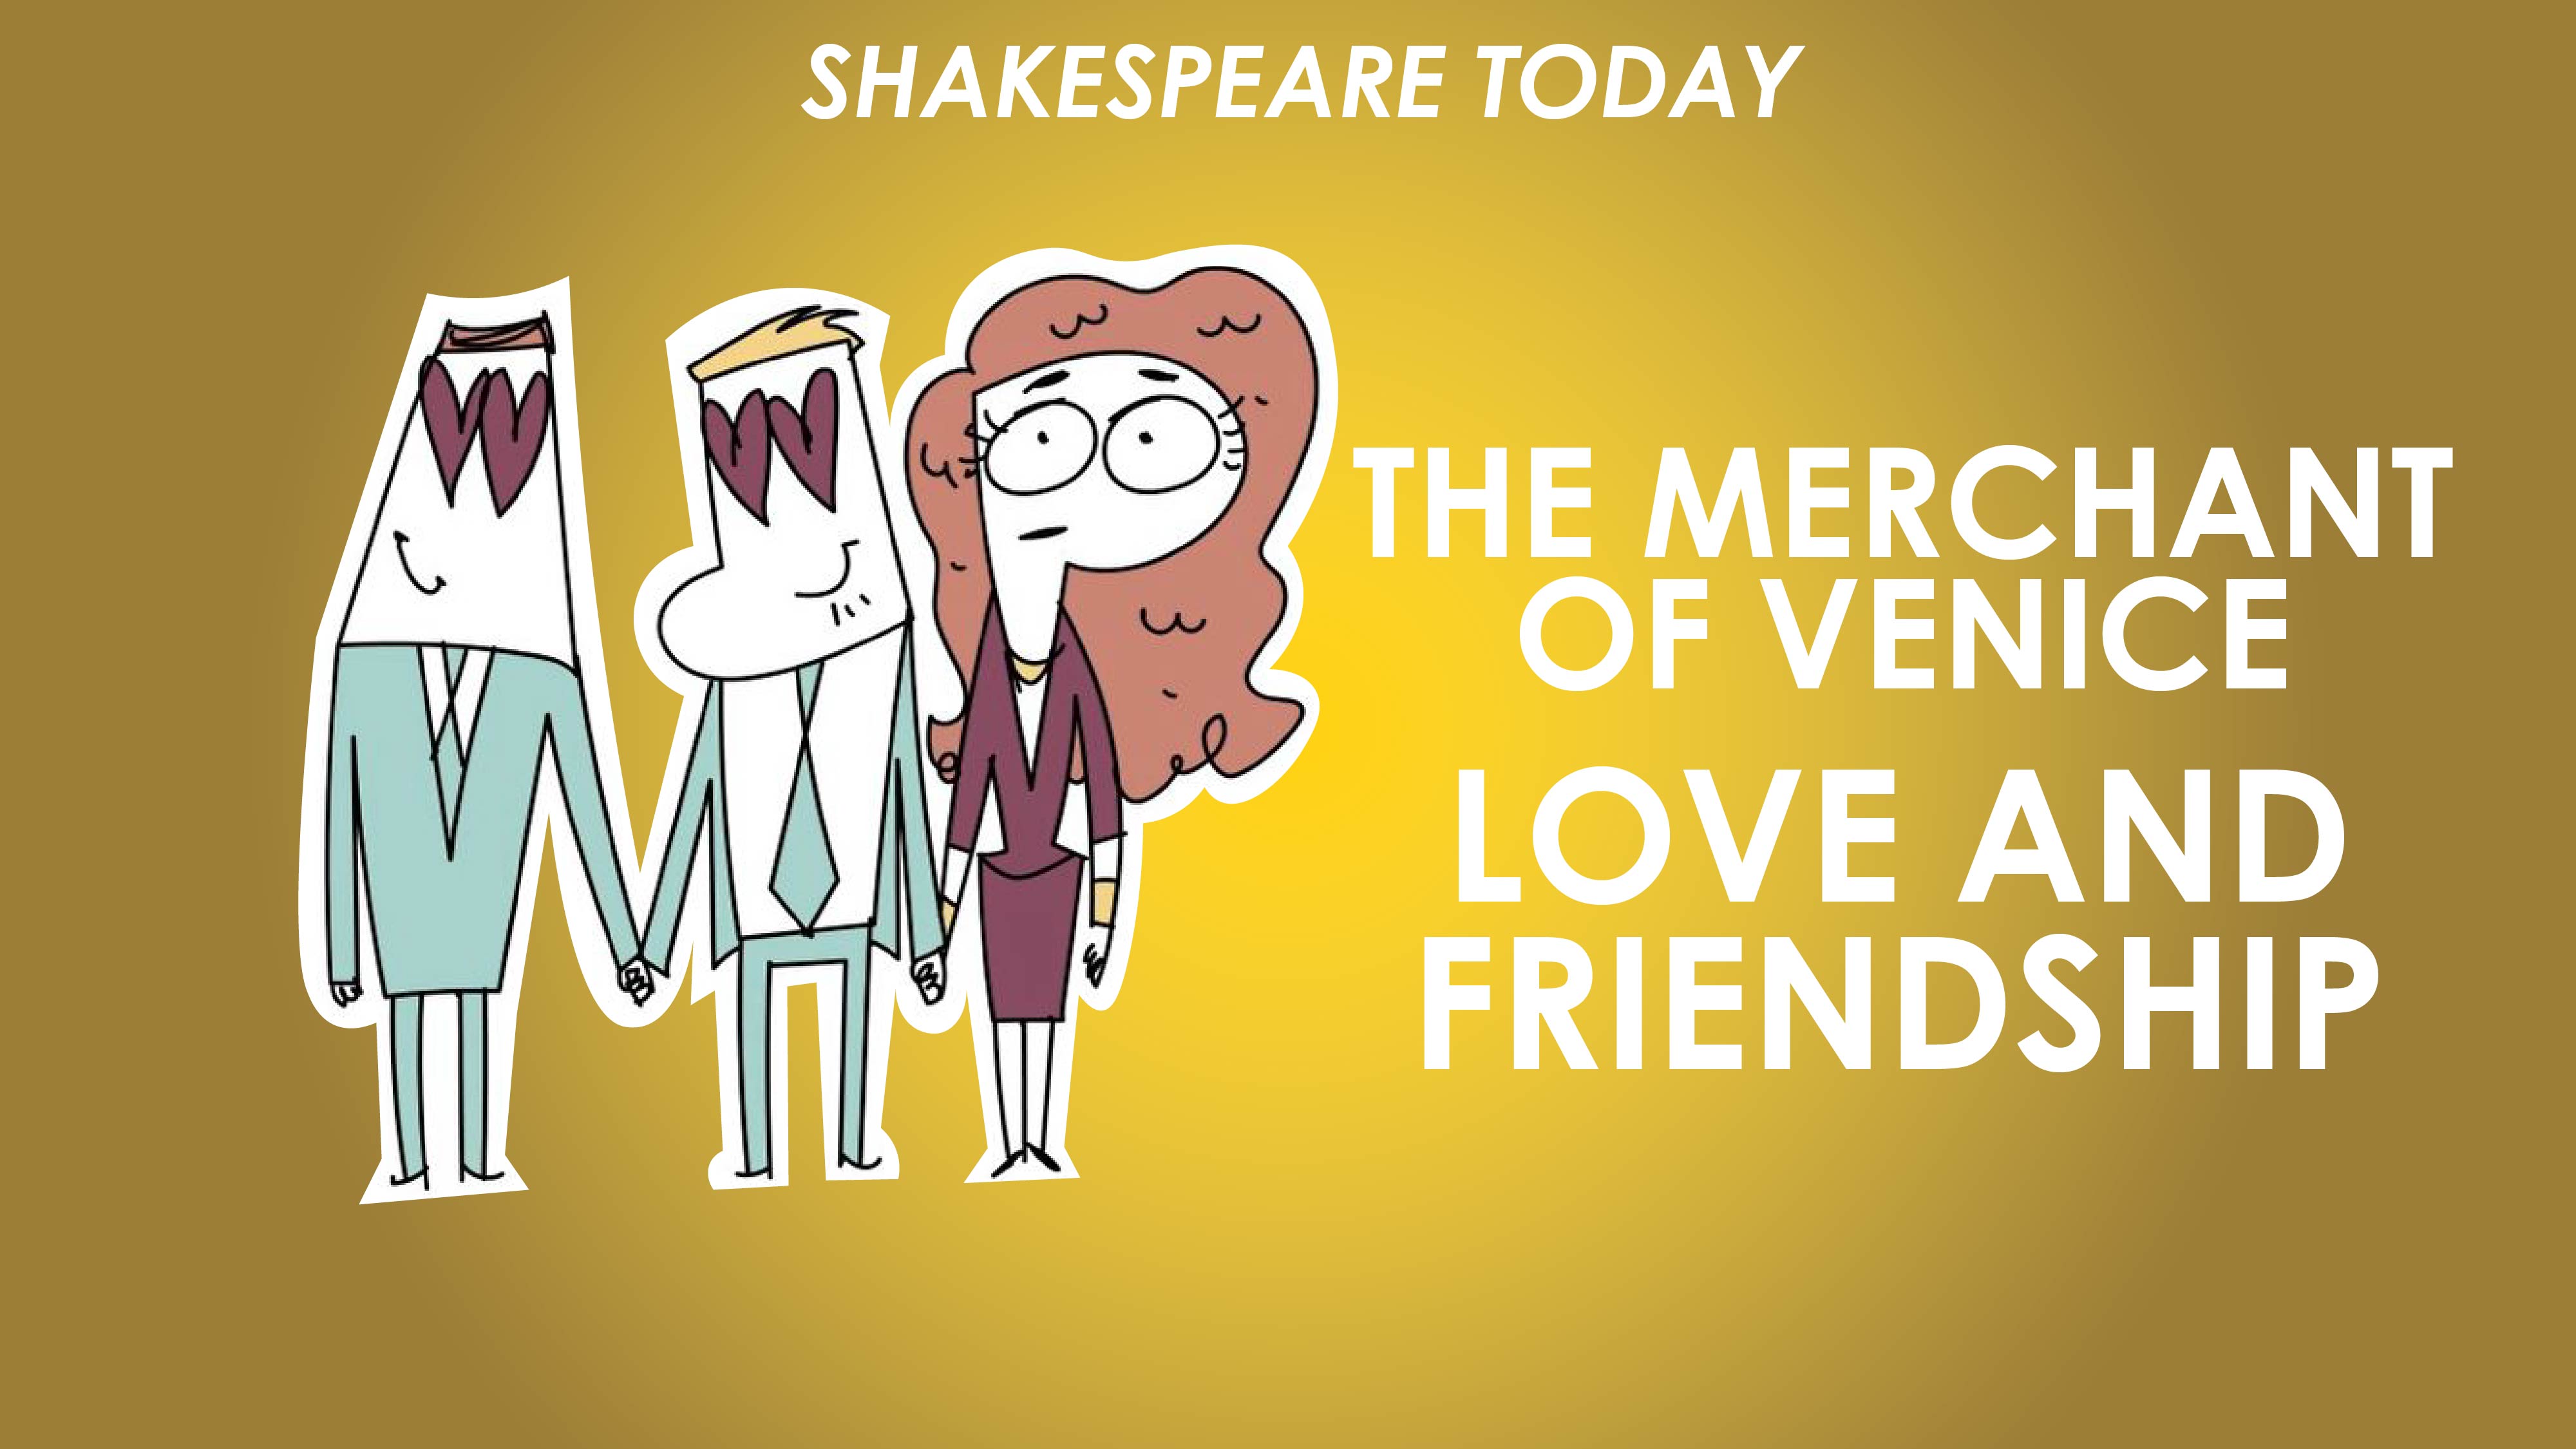 The Merchant of Venice Theme of Love and Friendship - Shakespeare Today Series